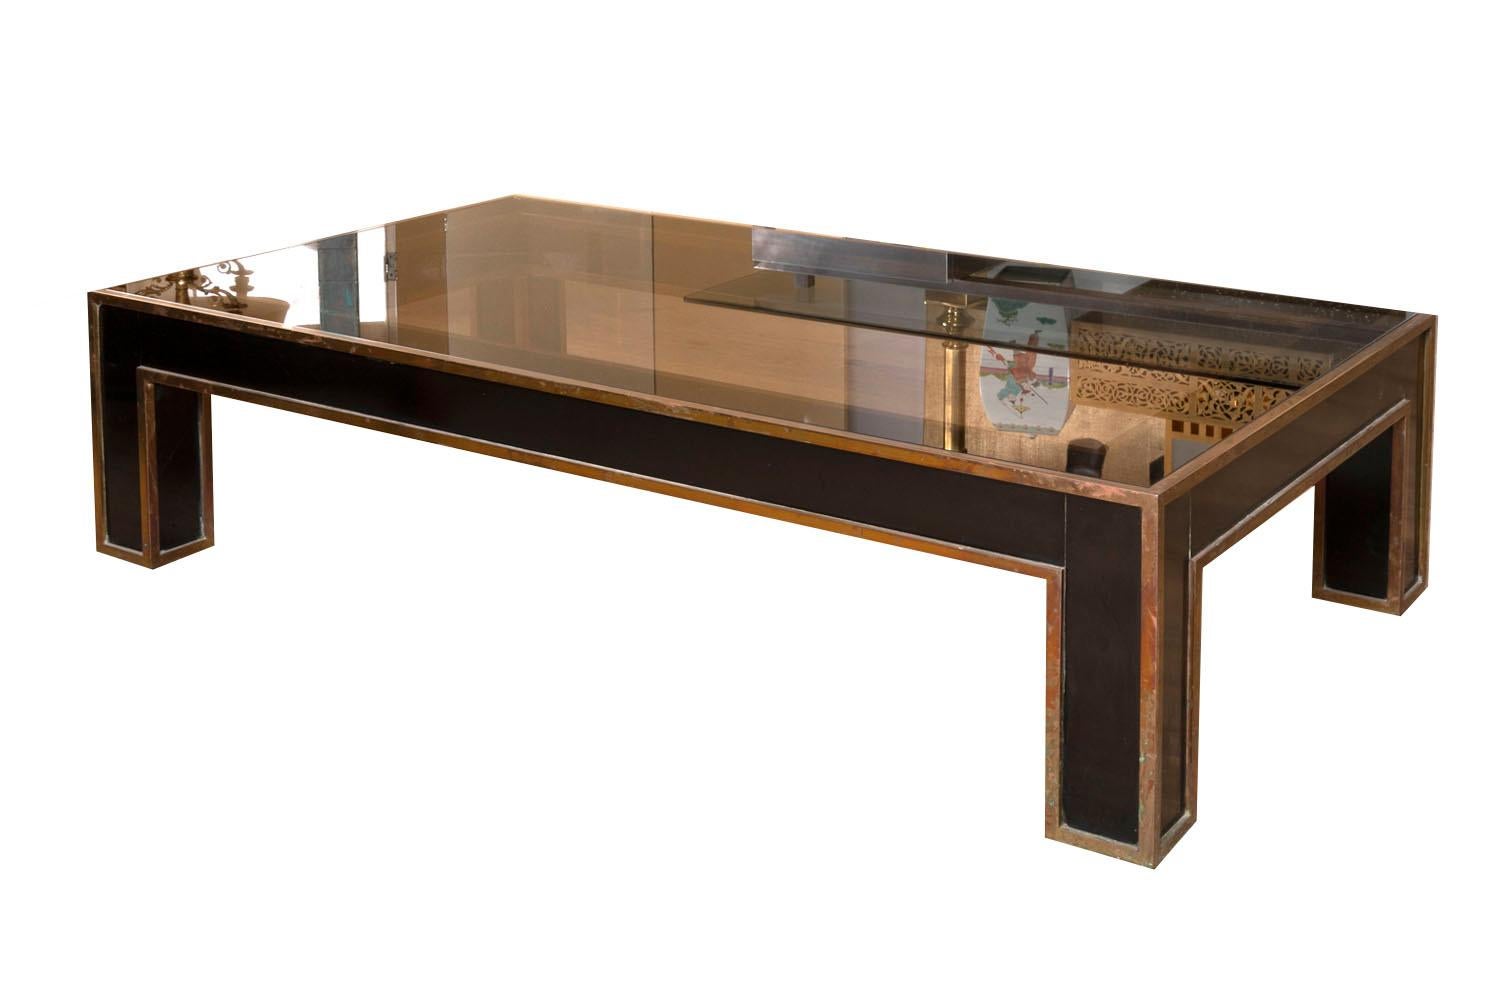 Rectangular coffee table in with thick square section legs with a background of black lacquer, crosspieces are similar. Gilt brass nets adorned angles edges of the whole structure. 
Smoked glass top, rectangular shaped.

Work from the 1970s.
 